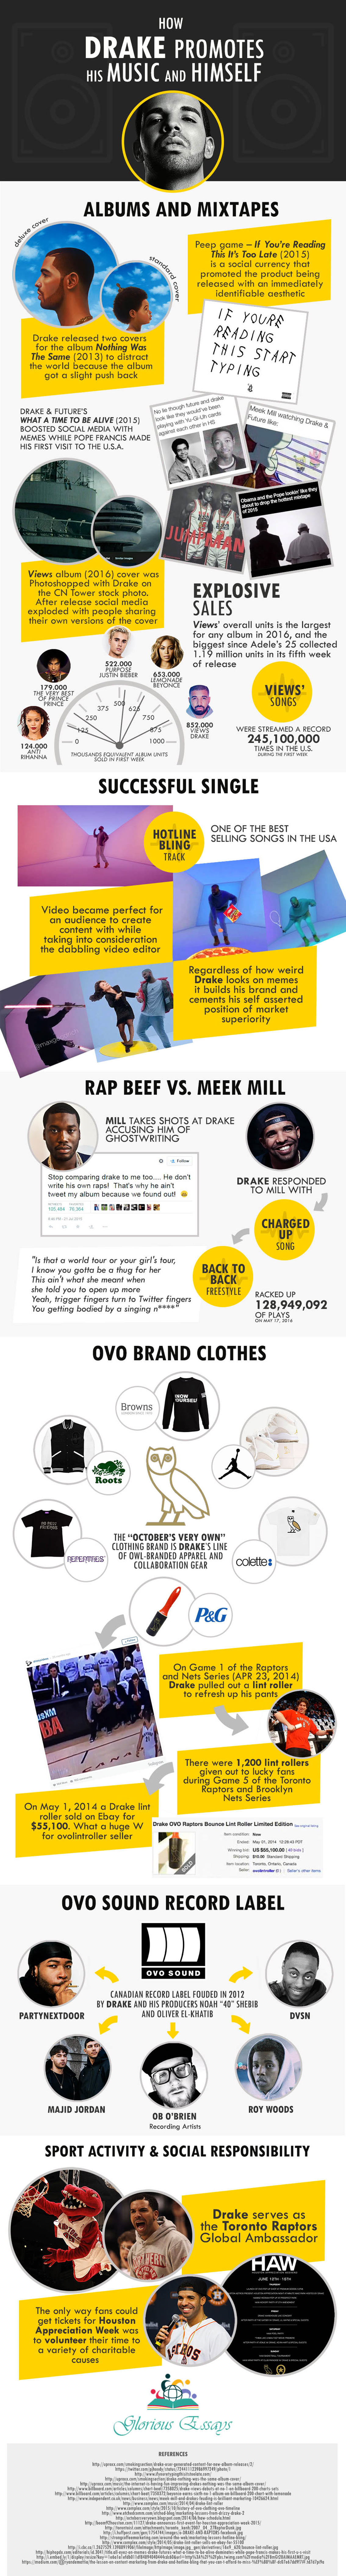 How Drake Promotes His Music And Himself Infographic